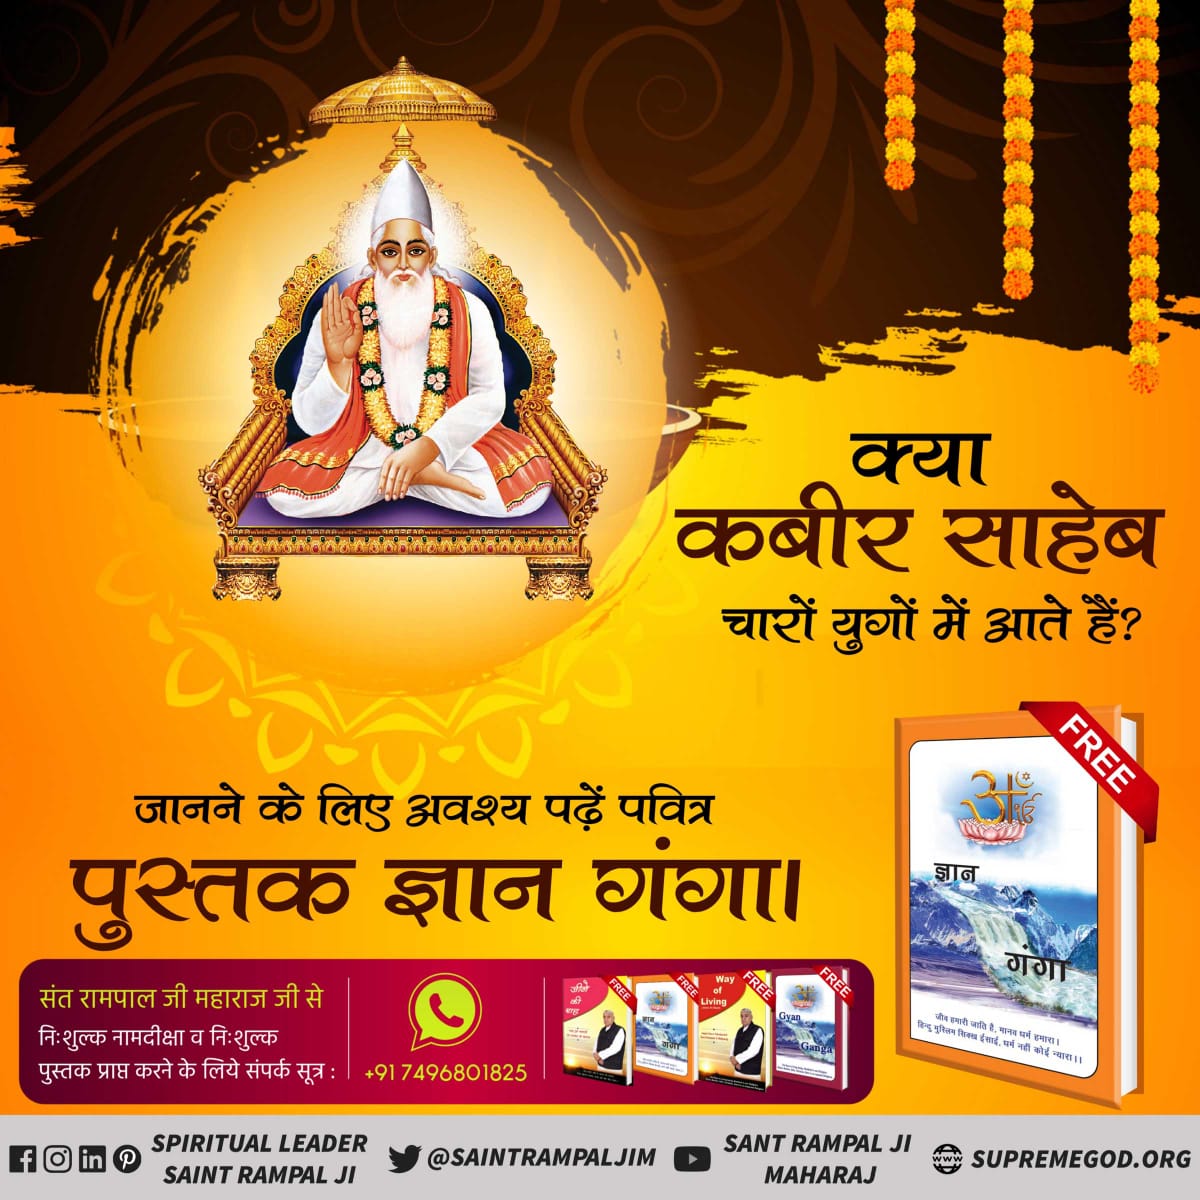 Which Satnaam Mantra did Guru Nanak Dev Ji chant? Discover the answer and gain deeper spiritual insights in the enlightening book 'Gyan Ganga.'

To get this book for free, Whatsapp us (+91 7496801825) your name, full address, pincode and mobile number. 

🌴Must Listen to the spir